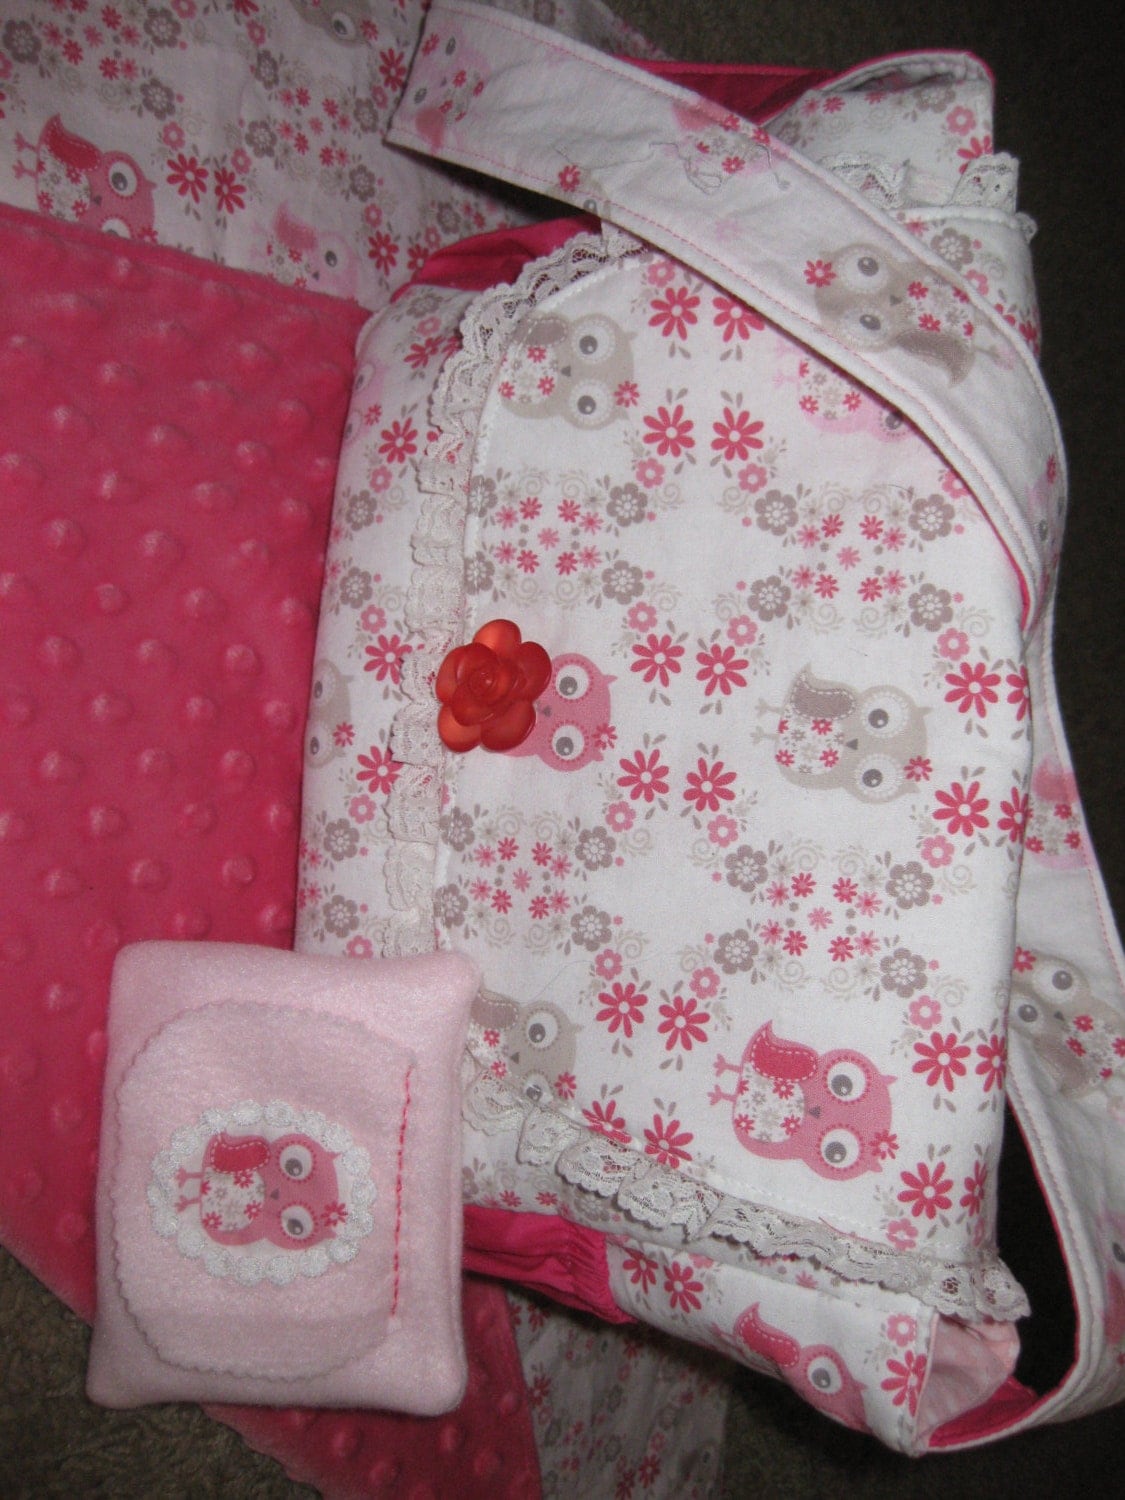 Baby Doll Diaper Bag & Accessories